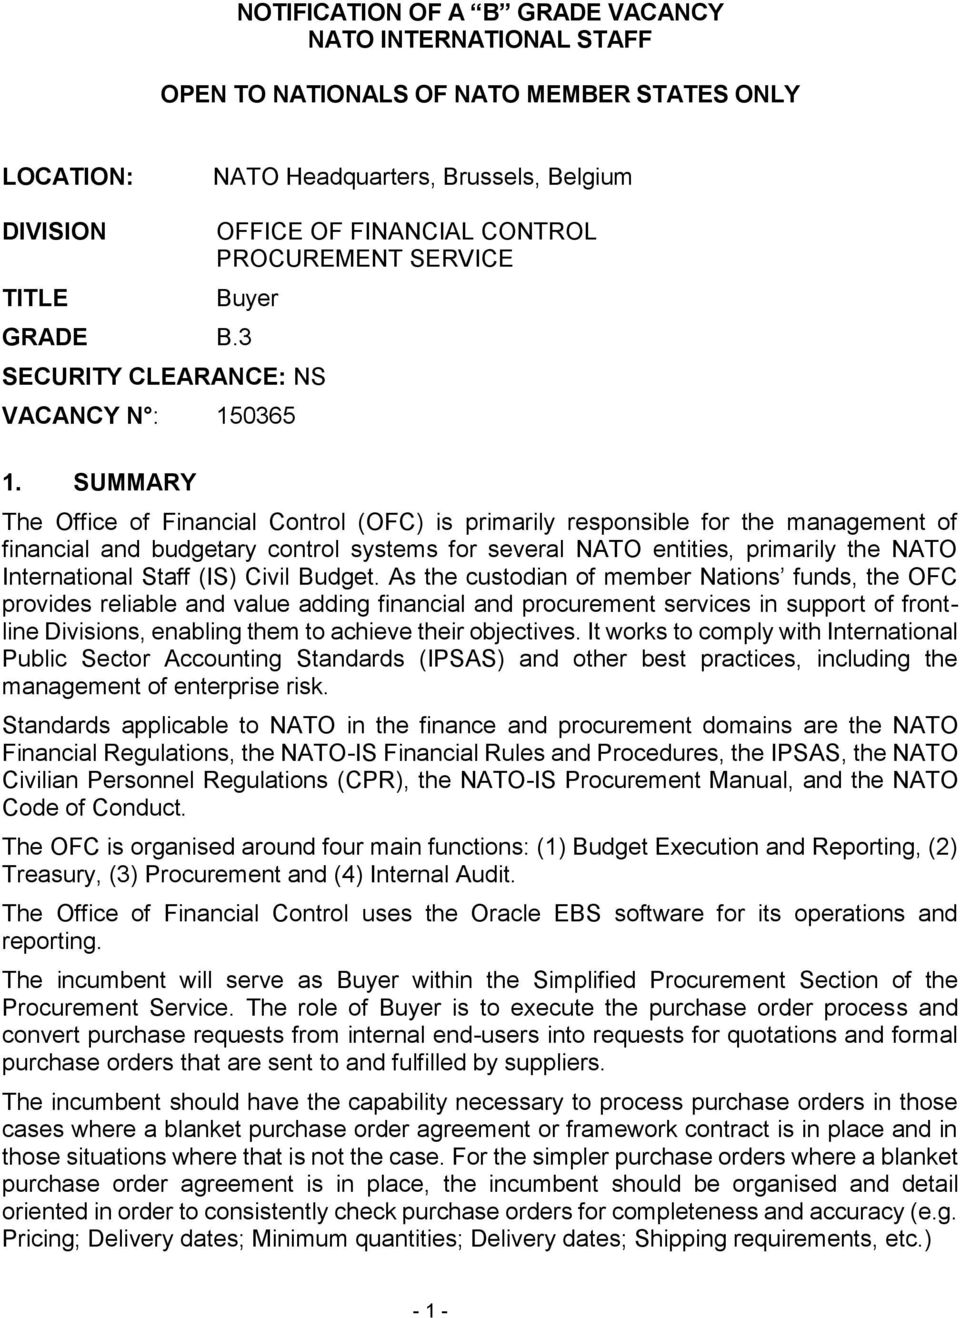 SUMMARY The Office of Financial Control (OFC) is primarily responsible for the management of financial and budgetary control systems for several NATO entities, primarily the NATO International Staff